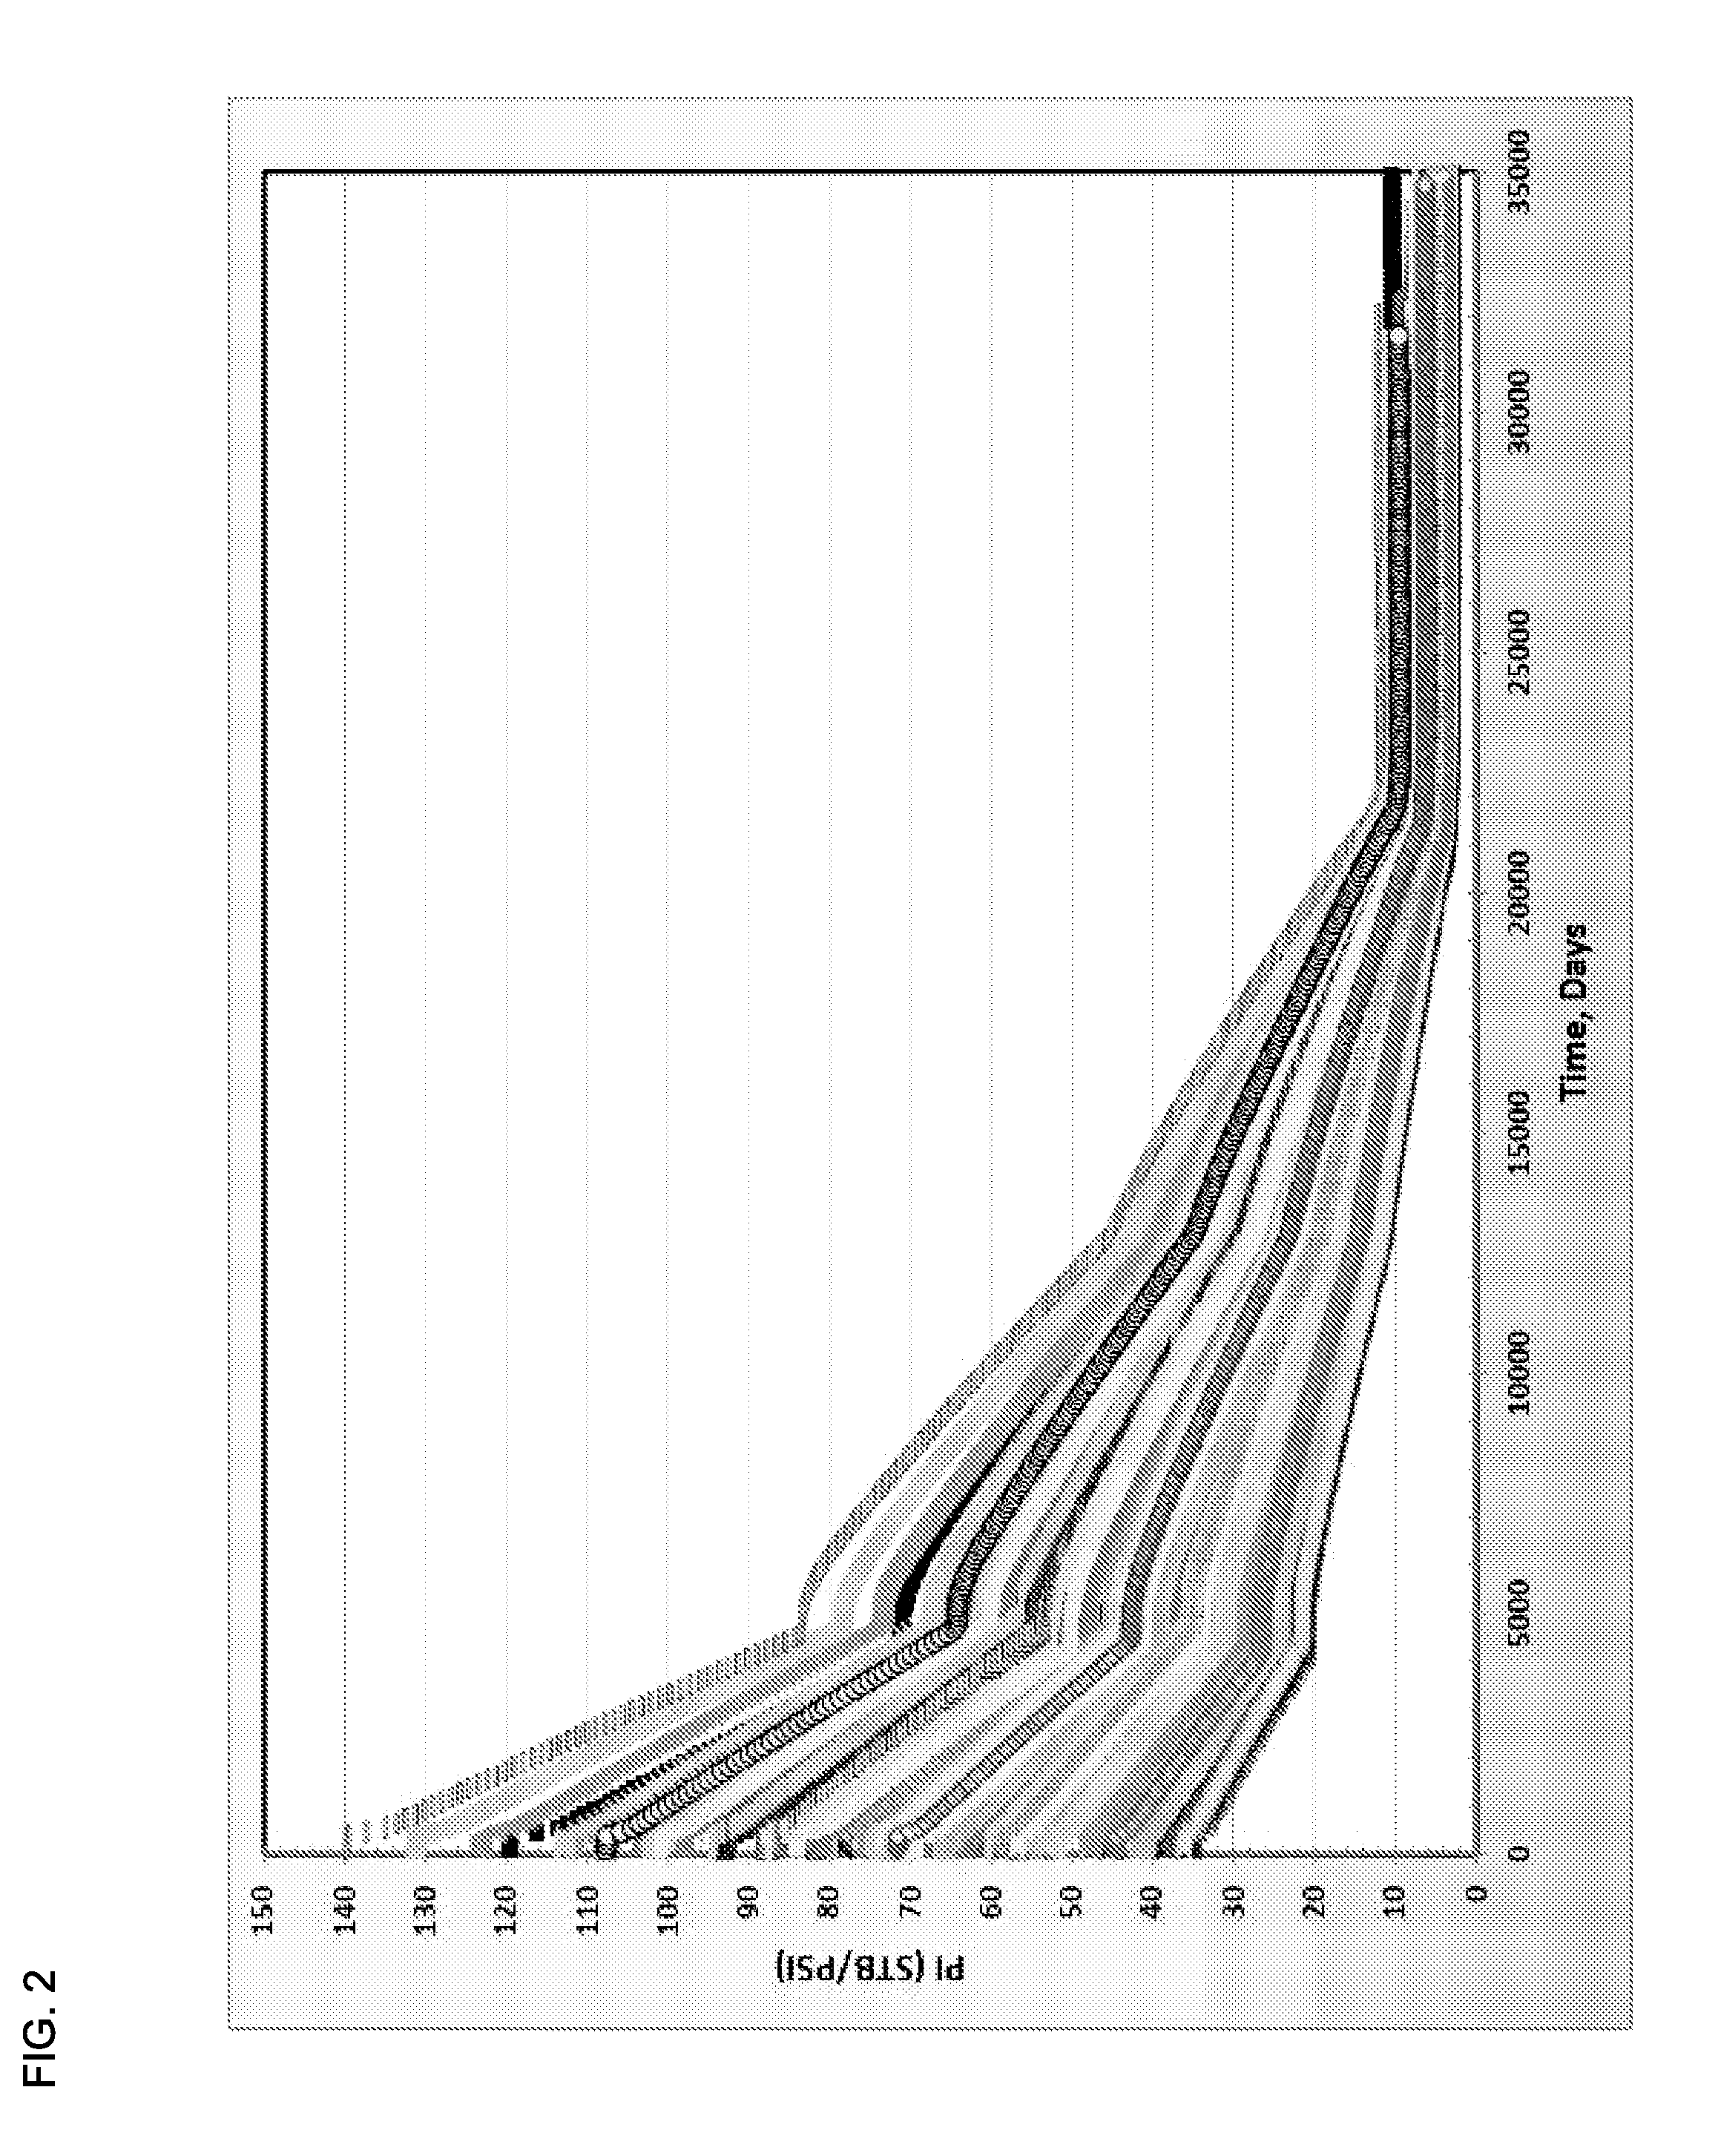 Methods, systems, and computer medium having computer programs stored thereon to optimize reservoir management decisions